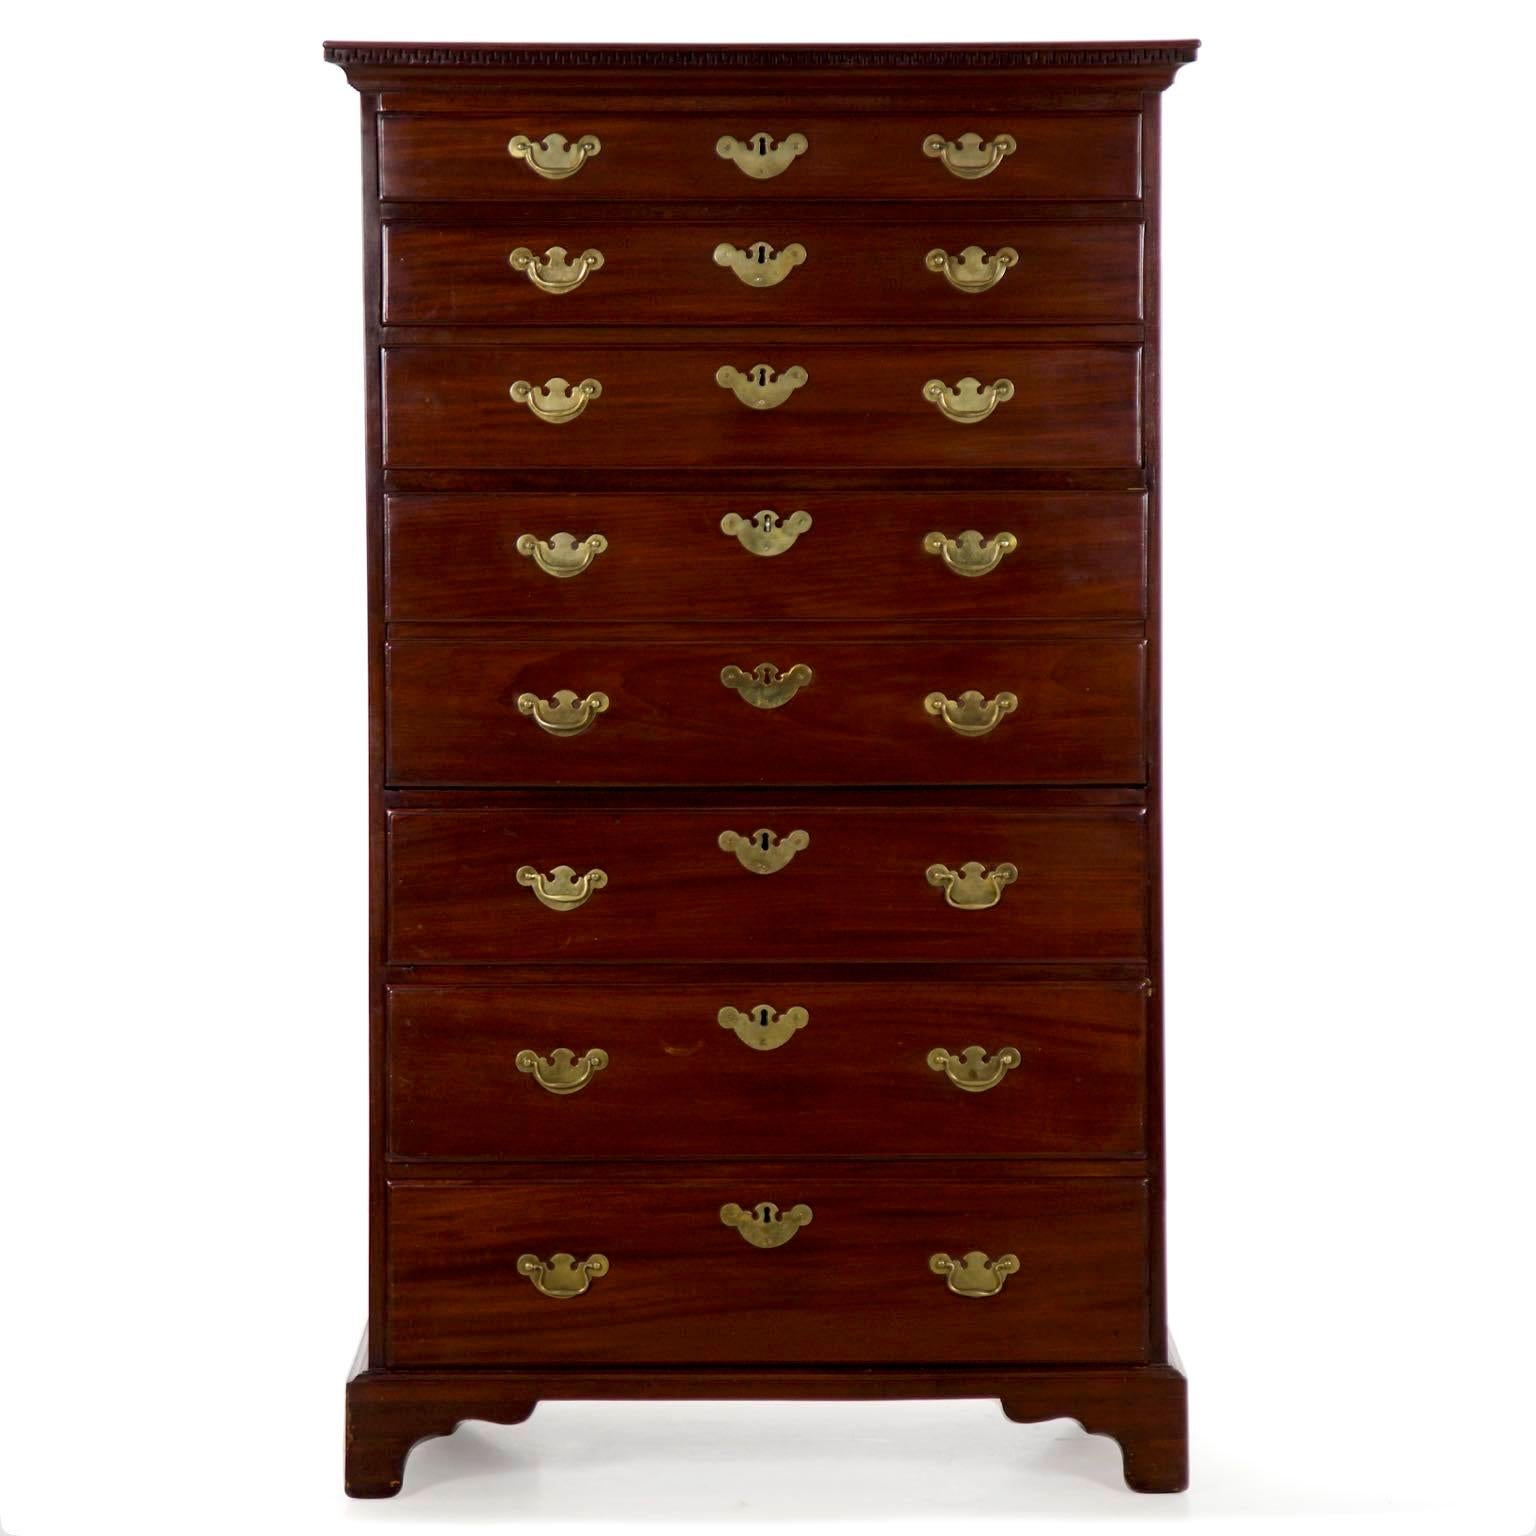 A very special piece of early English craftsmanship, this tall chest of drawers is executed in the finest selections of densely grained mahogany. Each plank has been carefully chosen for its pleasing character and smooth horizontal flow. The case